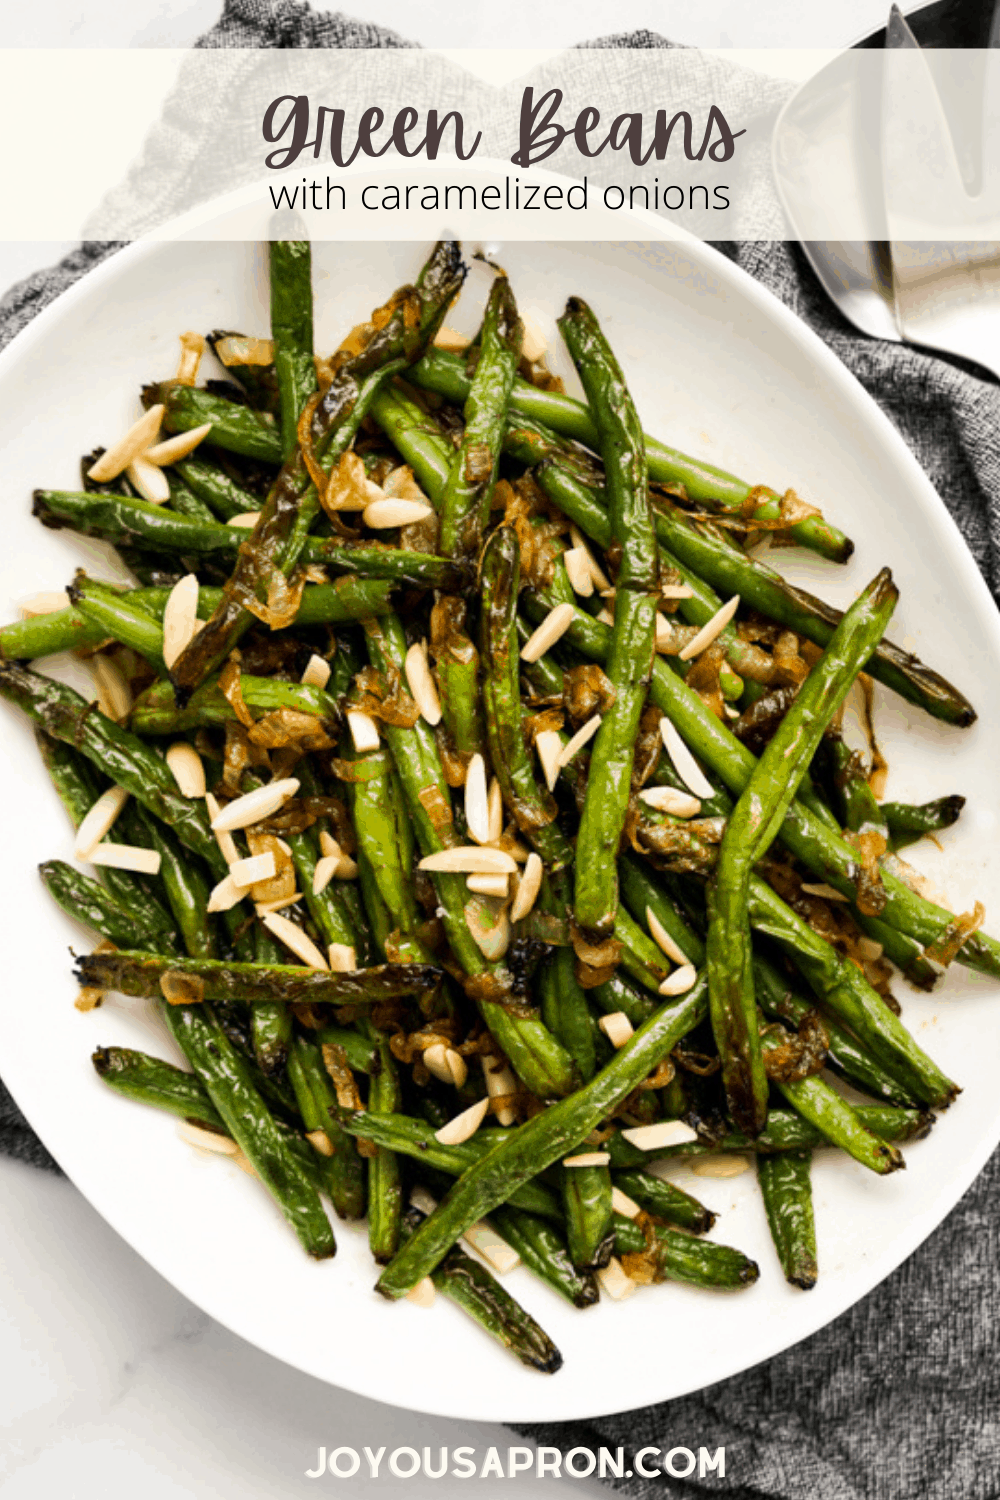 Green Beans with Caramelized Onions - A easy and delicious veggie side dish! Sweet caramelized onions sautéed with crunchy green beans, toss with garlic, butter, sea salt, then topped with shaved almonds.  via @joyousapron